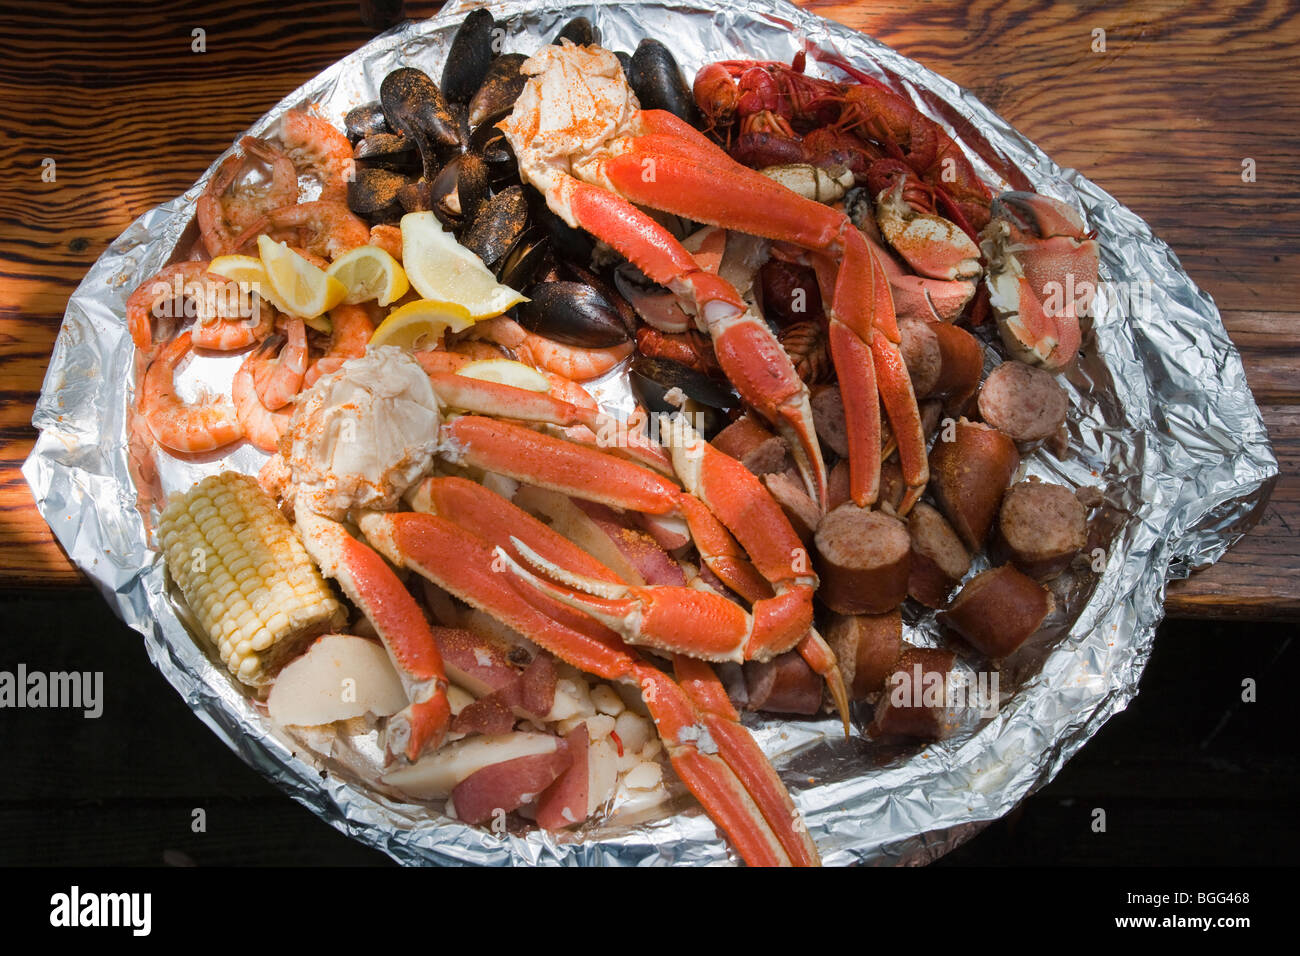 Shore seafood lunch. Stock Photo